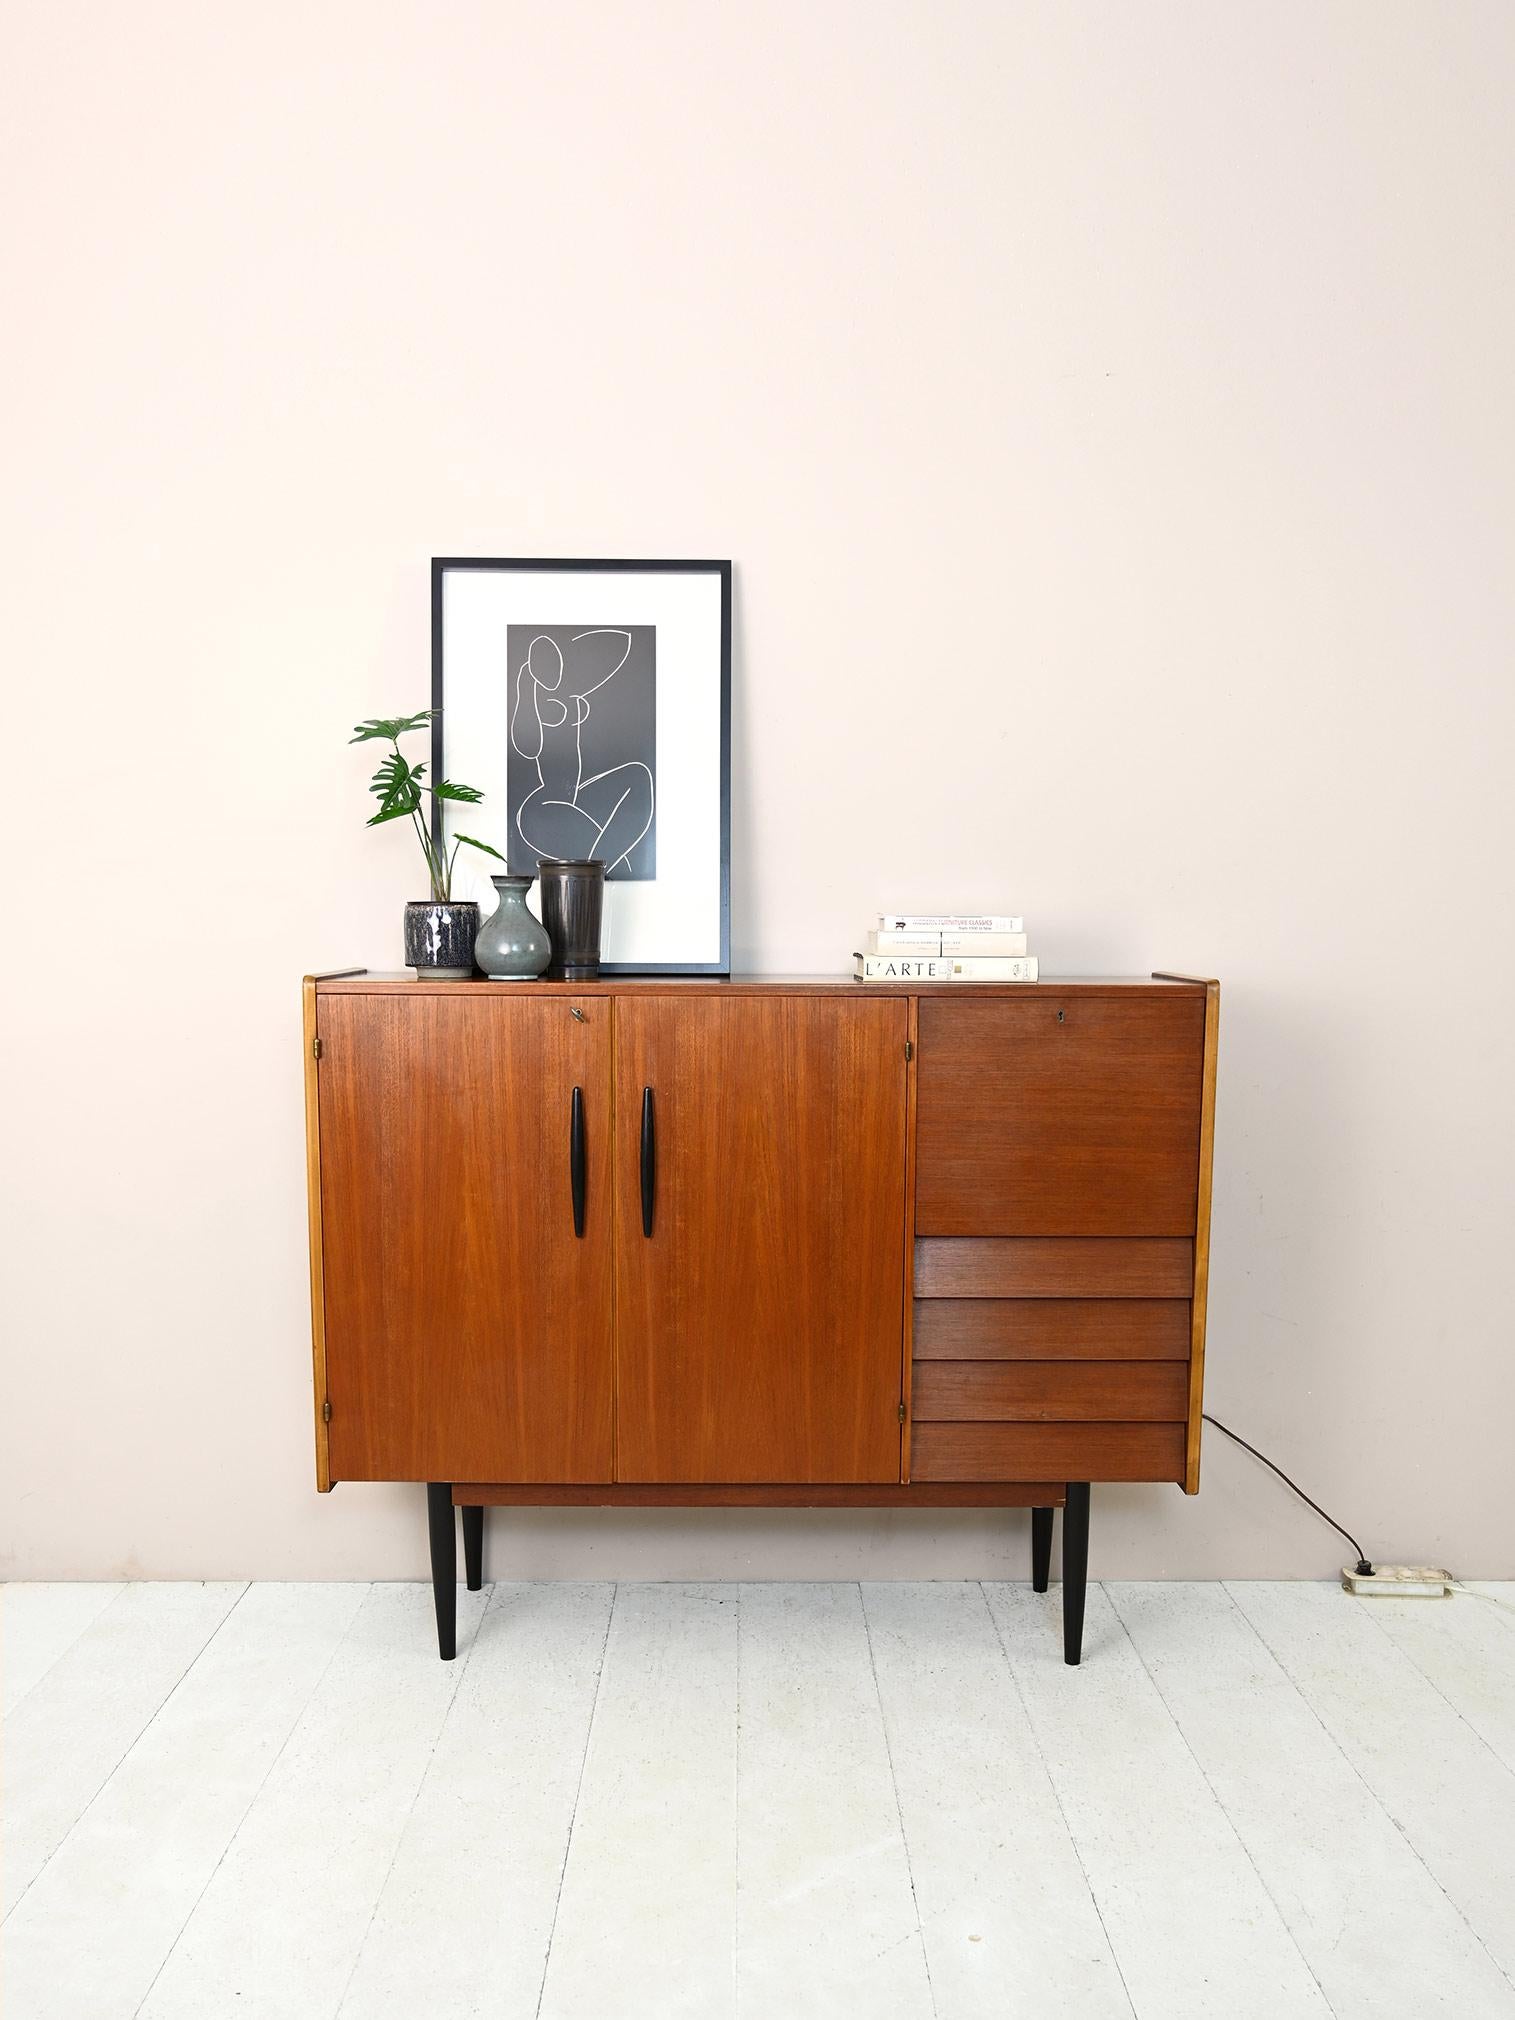 1960s teak sideboard with backlit storage compartment.

A modern piece of furniture with a retro feel consisting of a large storage compartment with hinged doors, 4 drawers and a flap.
It features black-painted details found in the wooden door